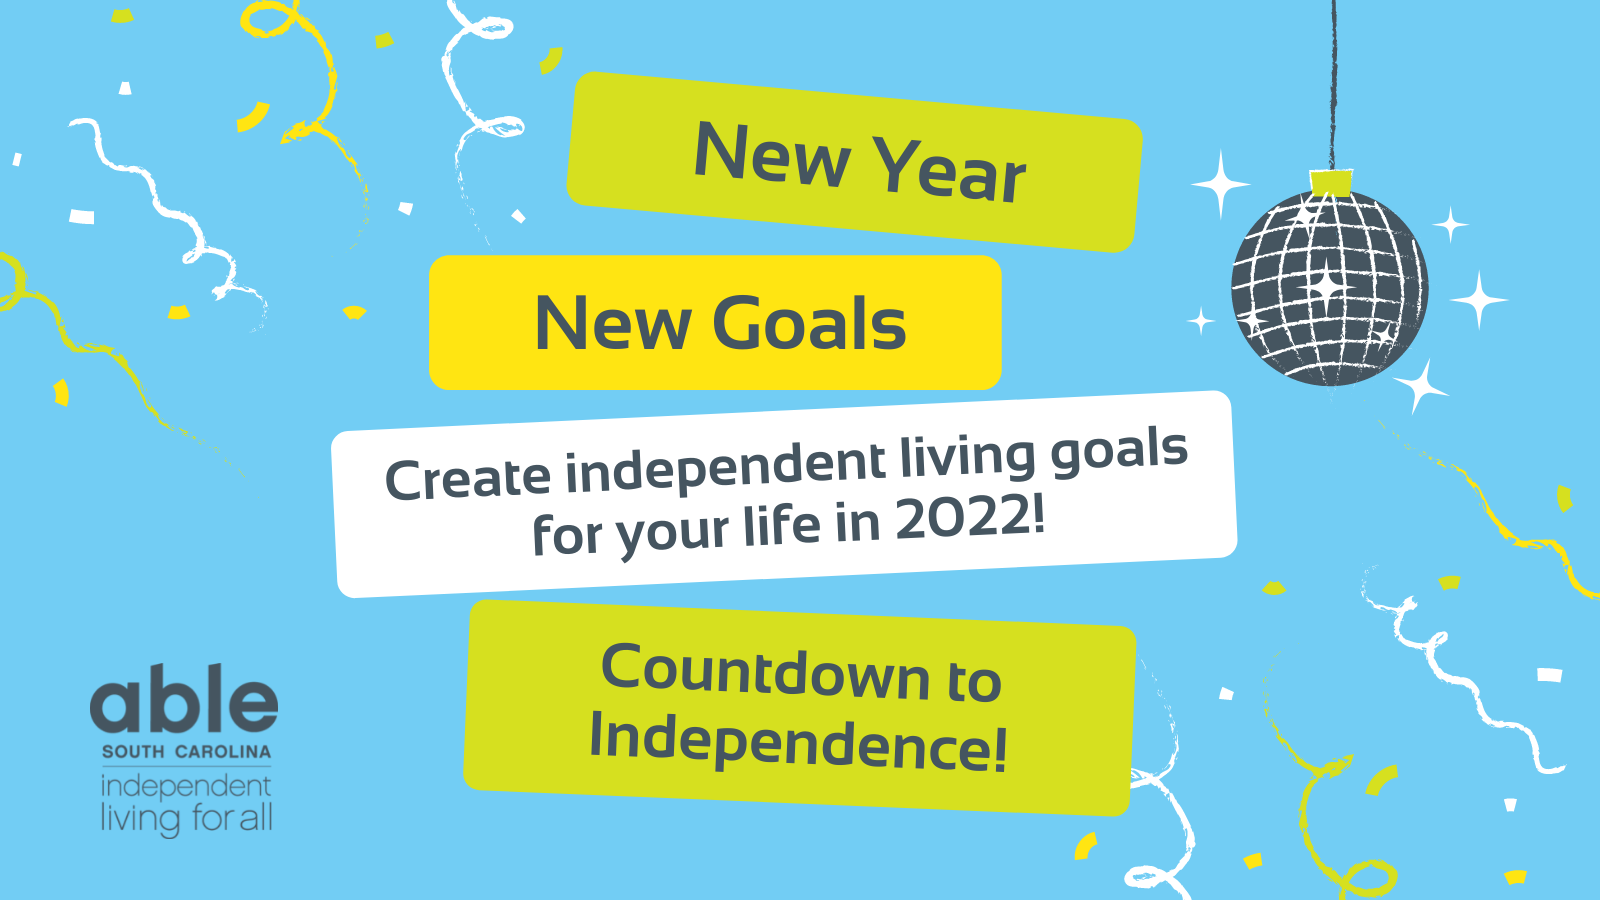 Graphic with blue background and illustrations of confetti and a disco ball in the corners. Lime green, yellow, and white blocks in the center contain gray text that reads, 'New Year, New Goals, Create independent living goals for your life in 2022! Countdown to Independence!' Able SC logo with slogan, 'Independent living for all' appears in the bottom left corner.